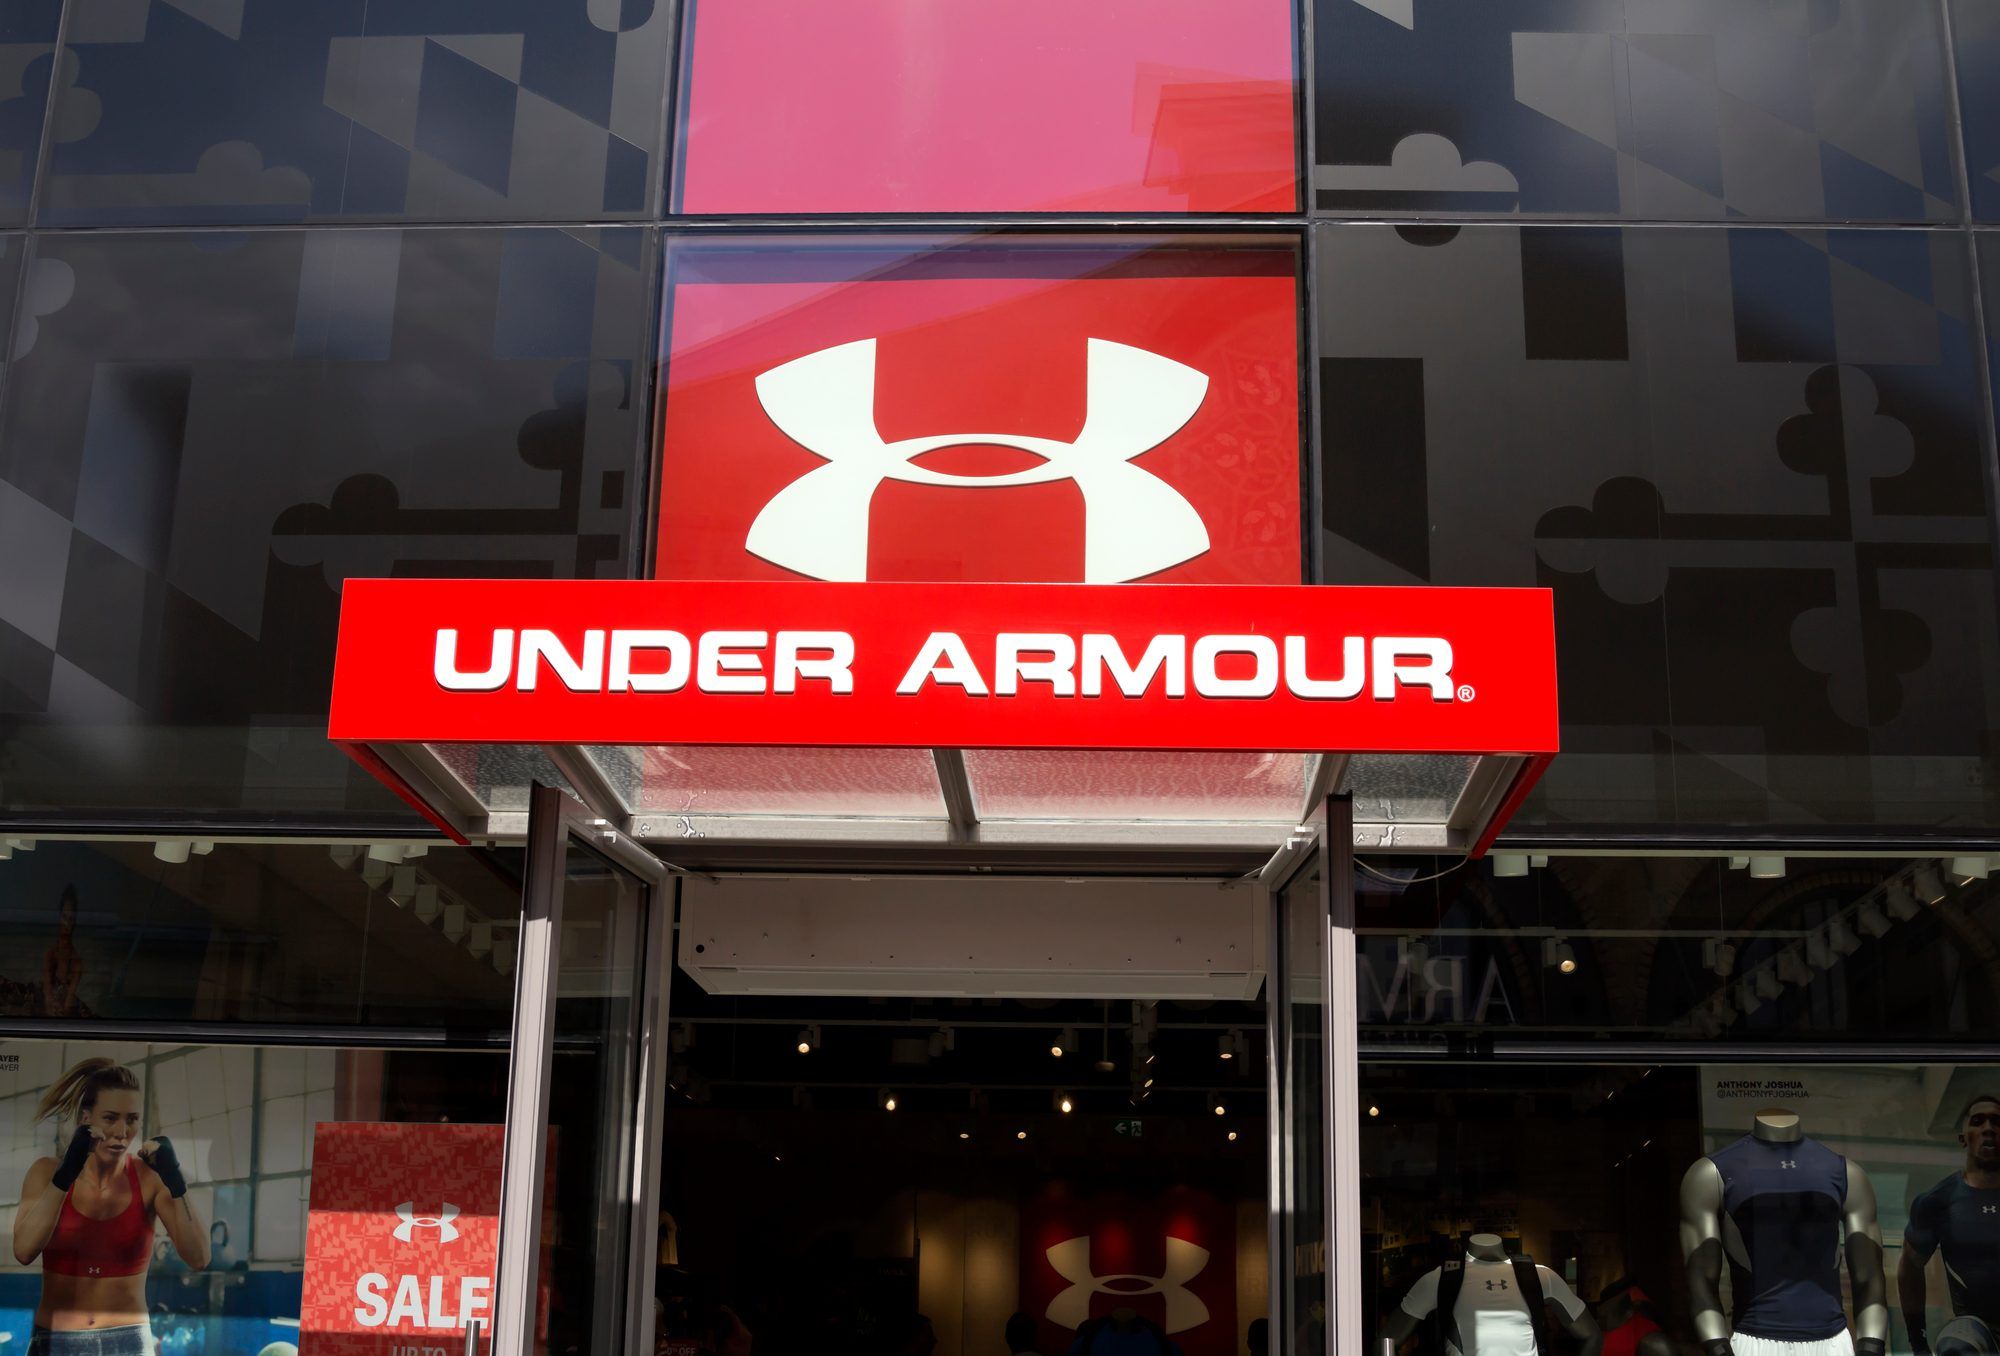 temperamento Adepto Borde Under Armour Class Action Lawsuit Challenges Athletic Clothes Advertising -  Top Class Actions